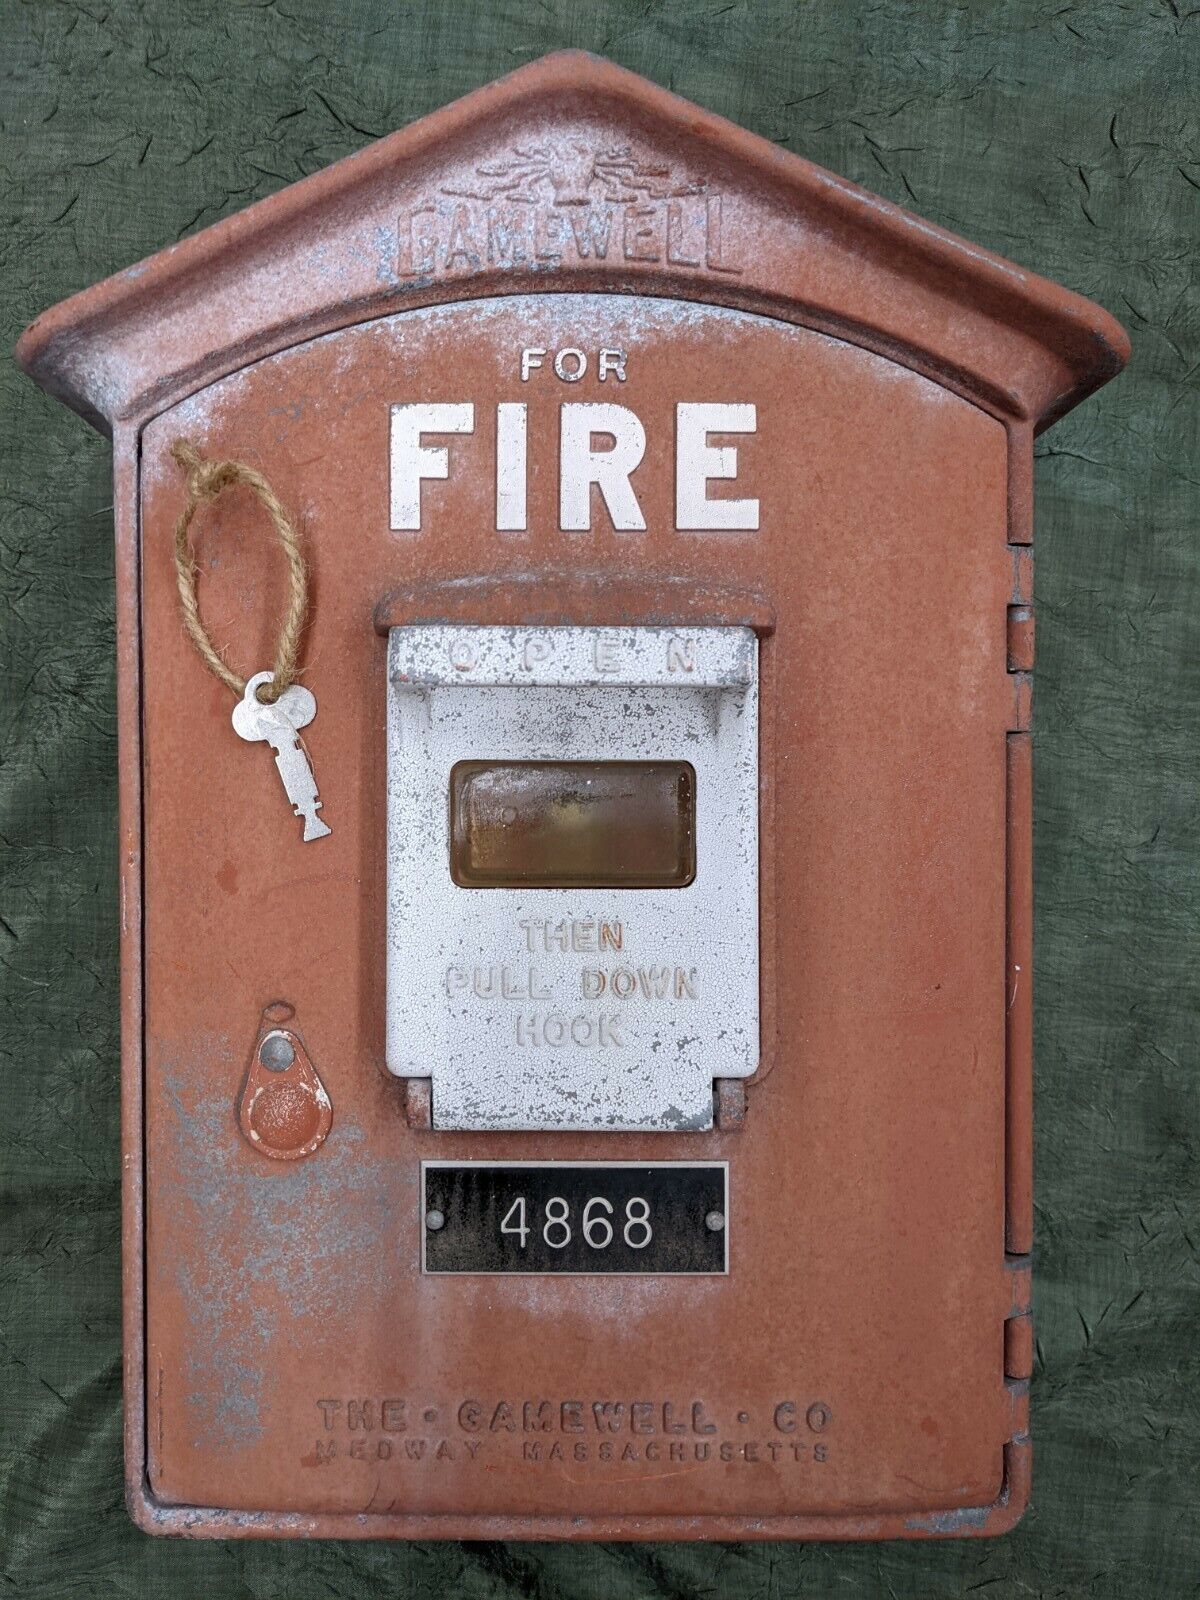 Vintage Gamewell fire call alarm box complete key & internal parts Newton MA 